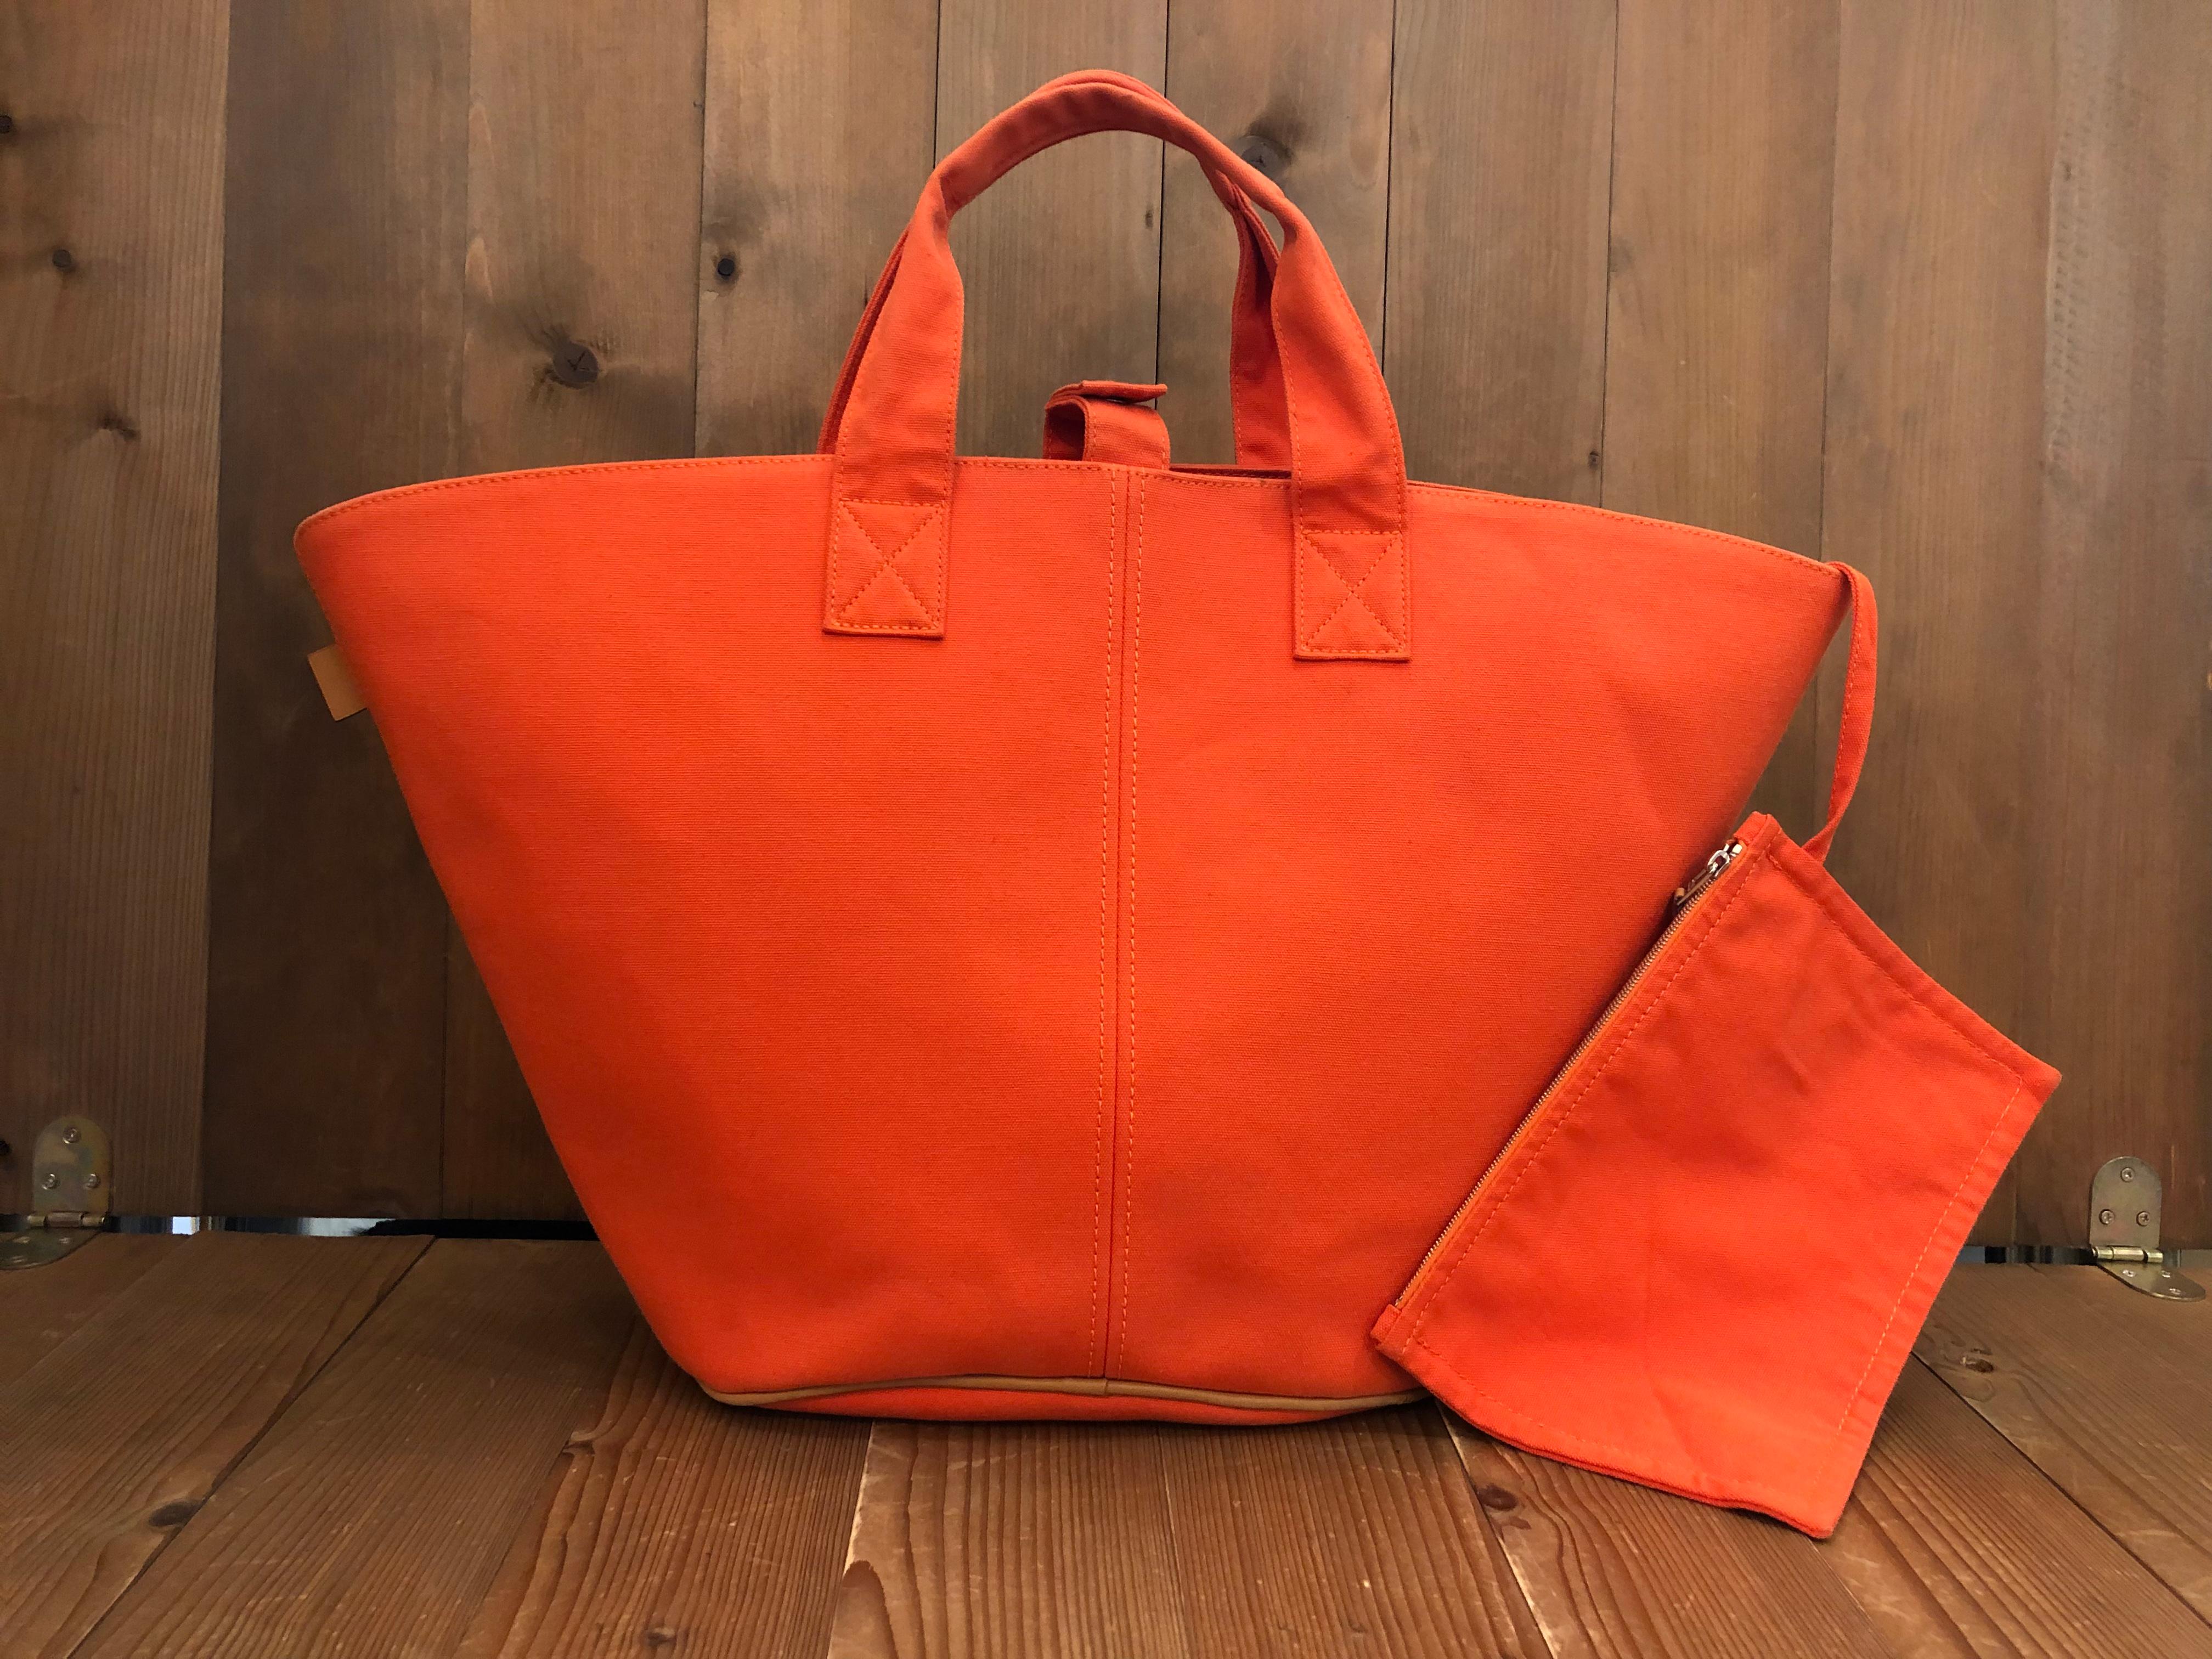 HERMES Pannied Platouge PM tote bag in vivid orange colored cotton trimmed with leather and silver hardware. This Hermes tote features a wide opening with snap fastening closure for easy access to your belongings and a pouch with zipper closure of